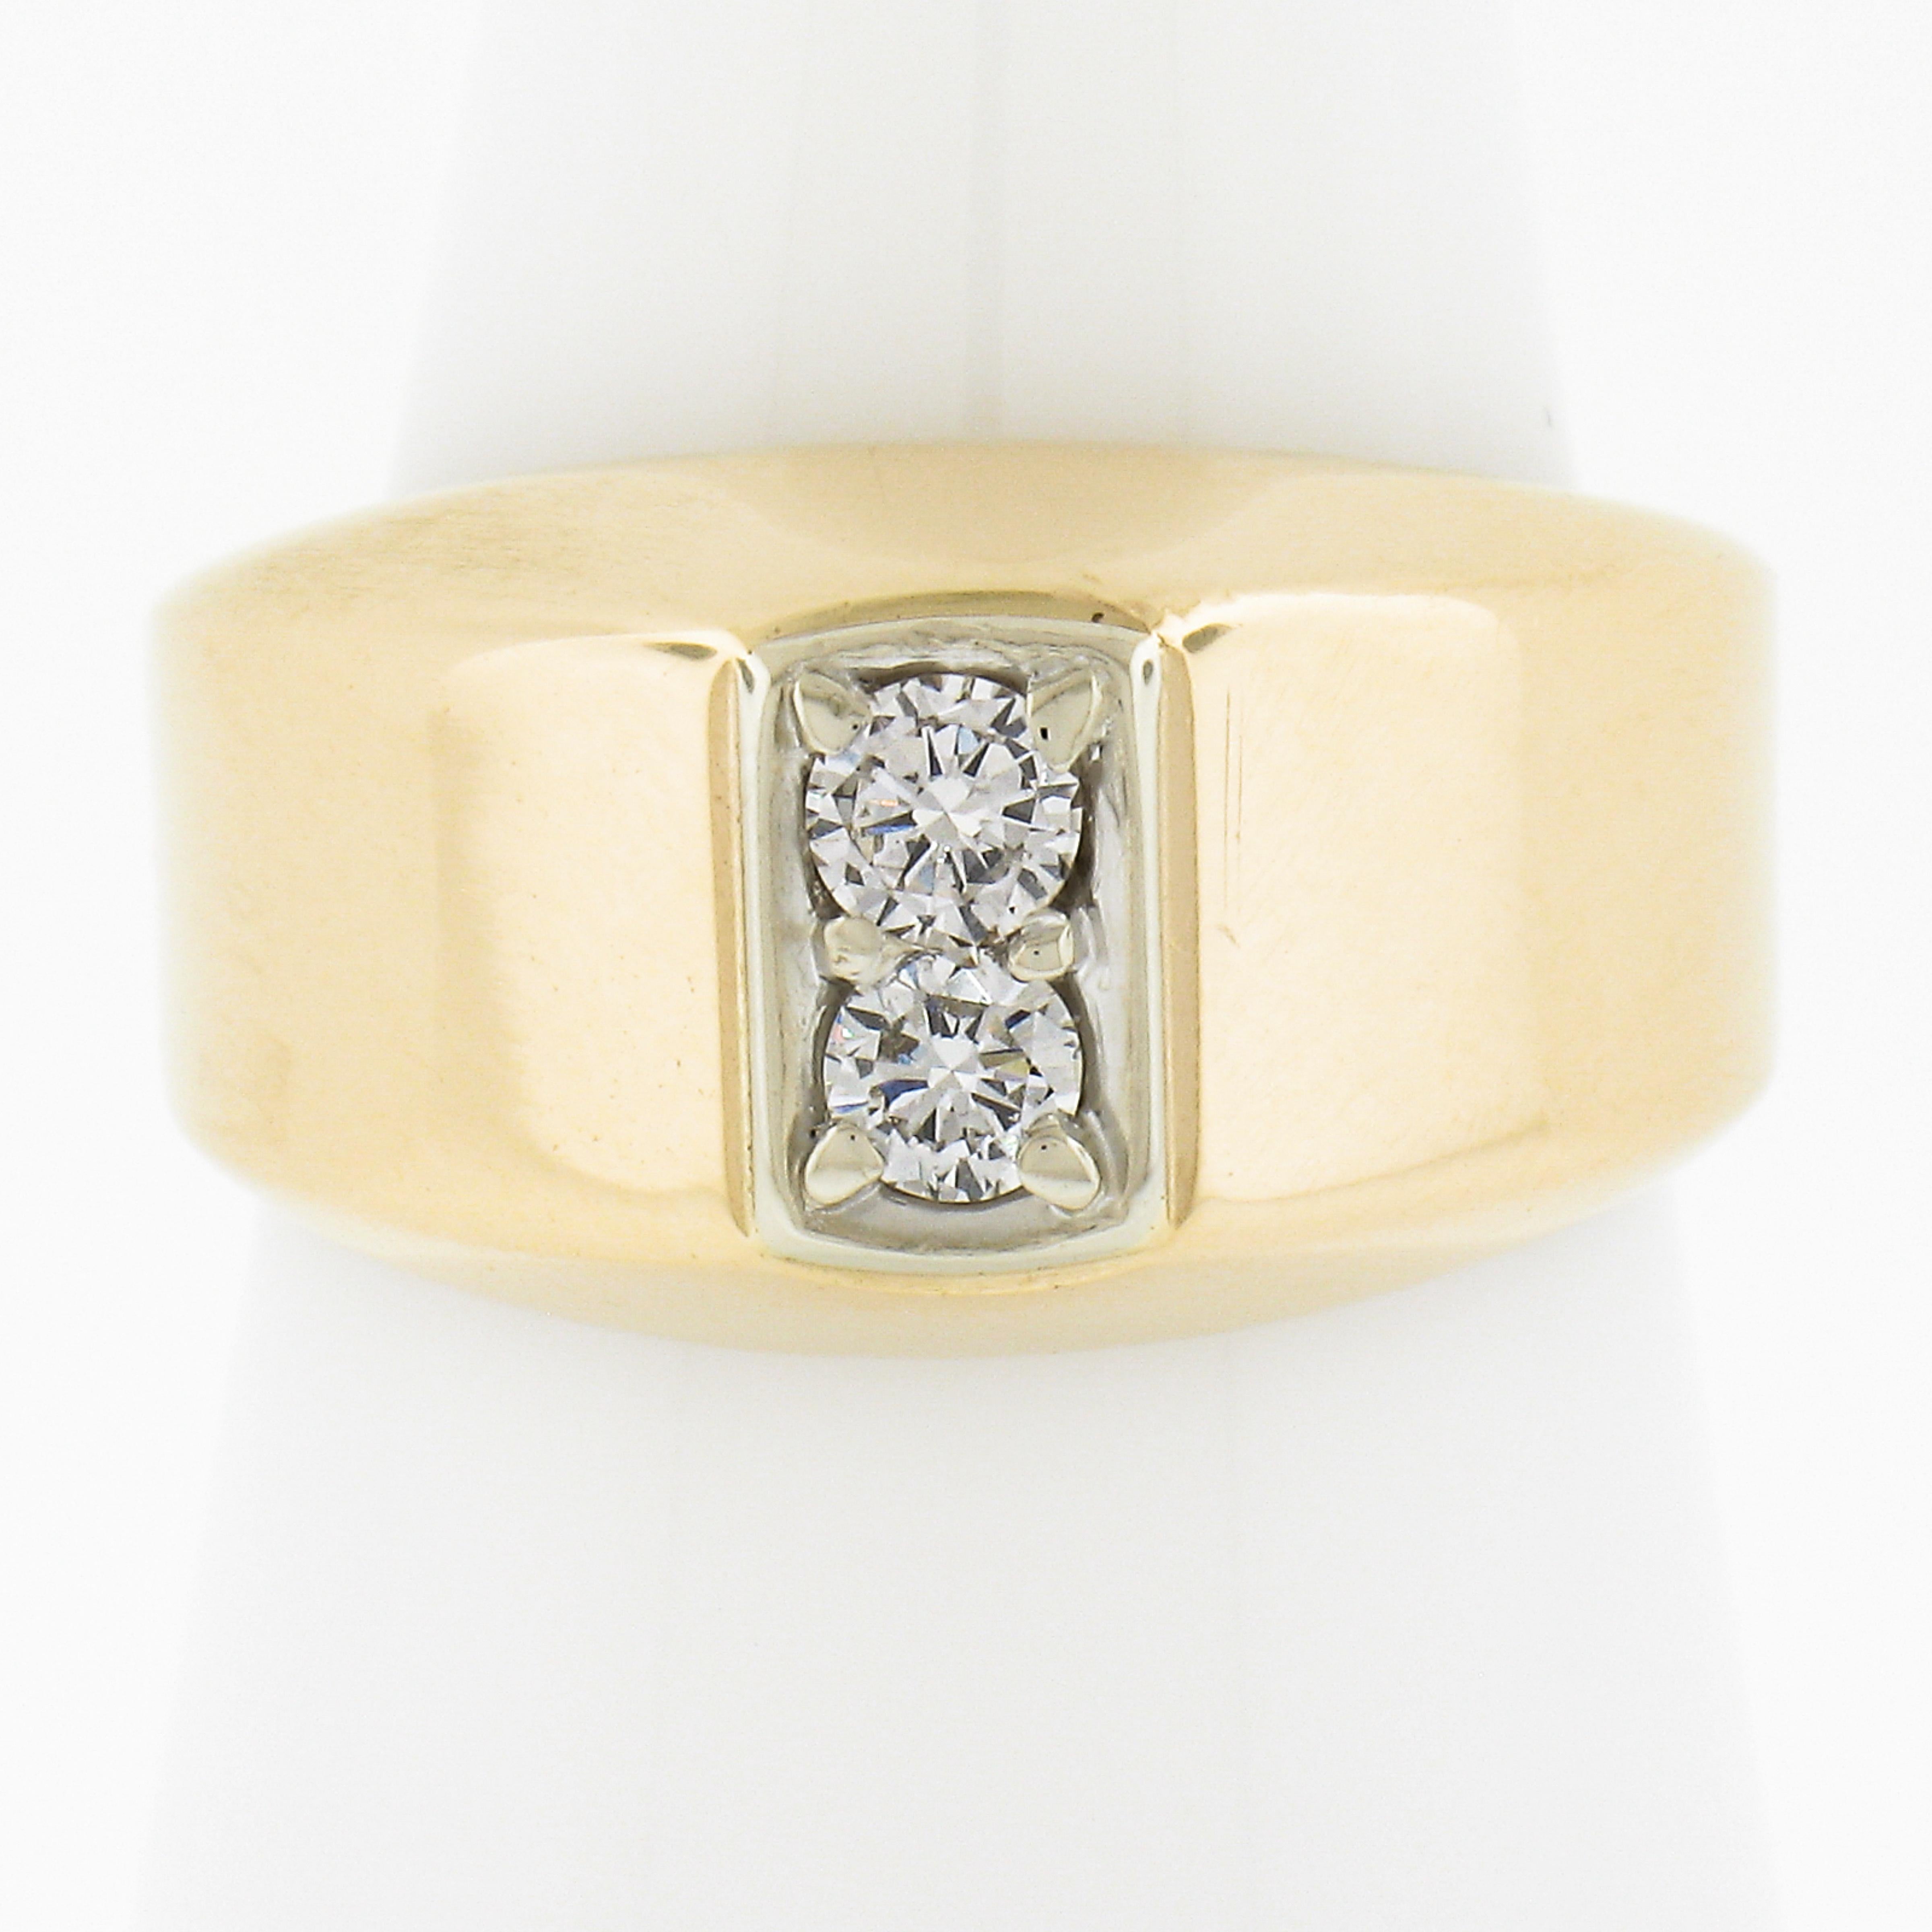 --Stone(s):--
(2) Natural Genuine Diamonds - Round Brilliant Cut - Pave Set - H-J Color - VS1/VS2 Clarity
Total Carat Weight: 0.24 (approx.)

Material: Solid 14k Yellow Gold w/ White Gold Top
Weight: 6.18 Grams
Ring Size: 7.0 (We can custom size